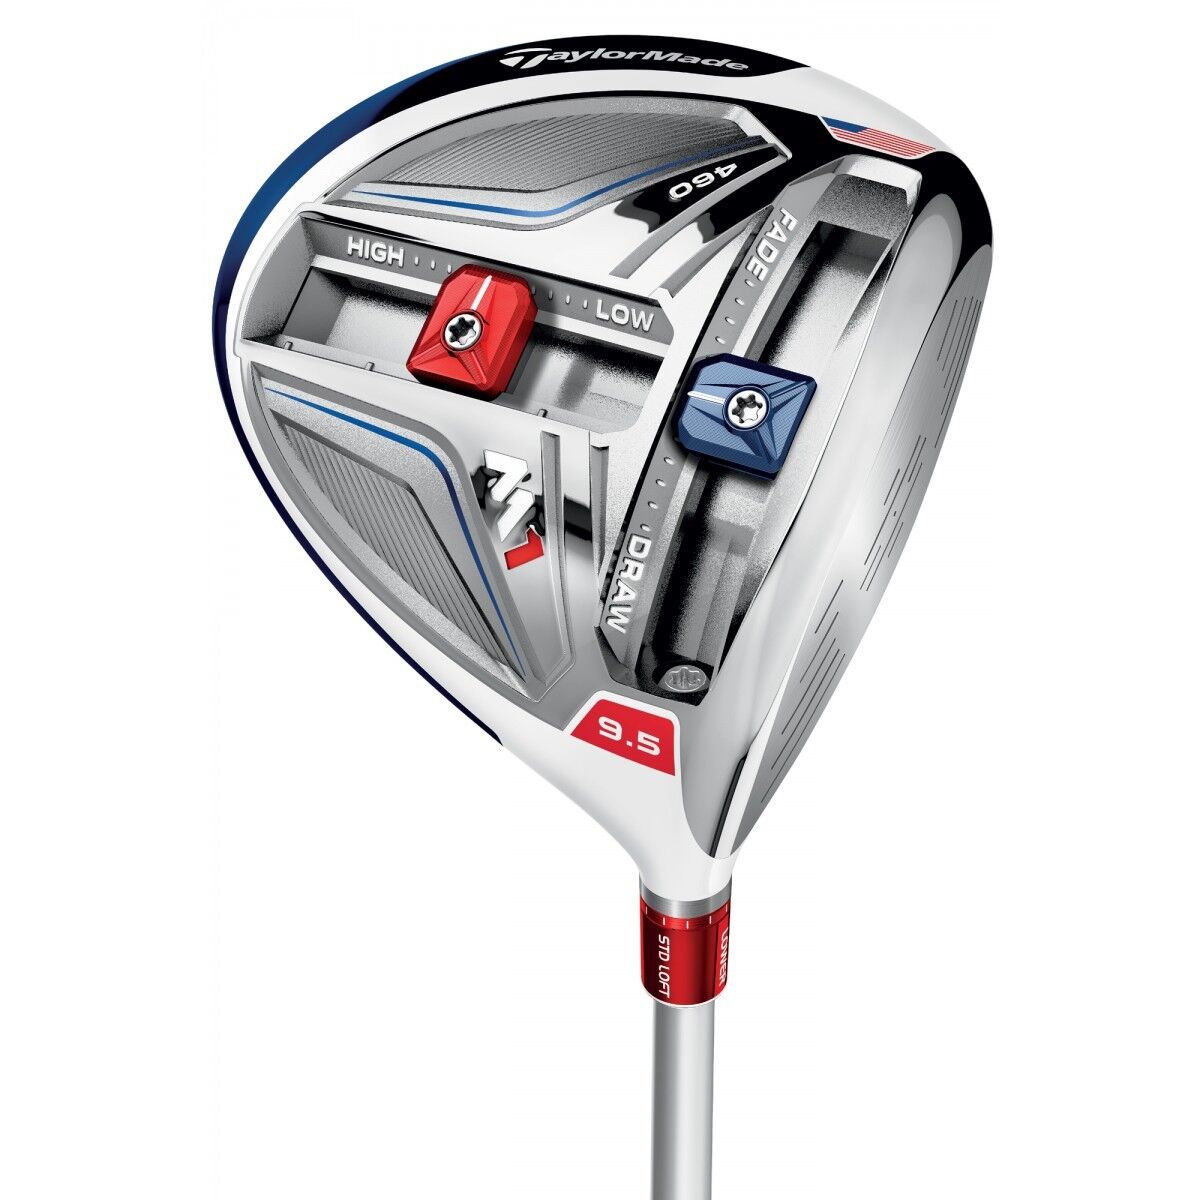 NEW Taylormade Limited Edition USA M1 10.5* Driver Regular Red White Blue